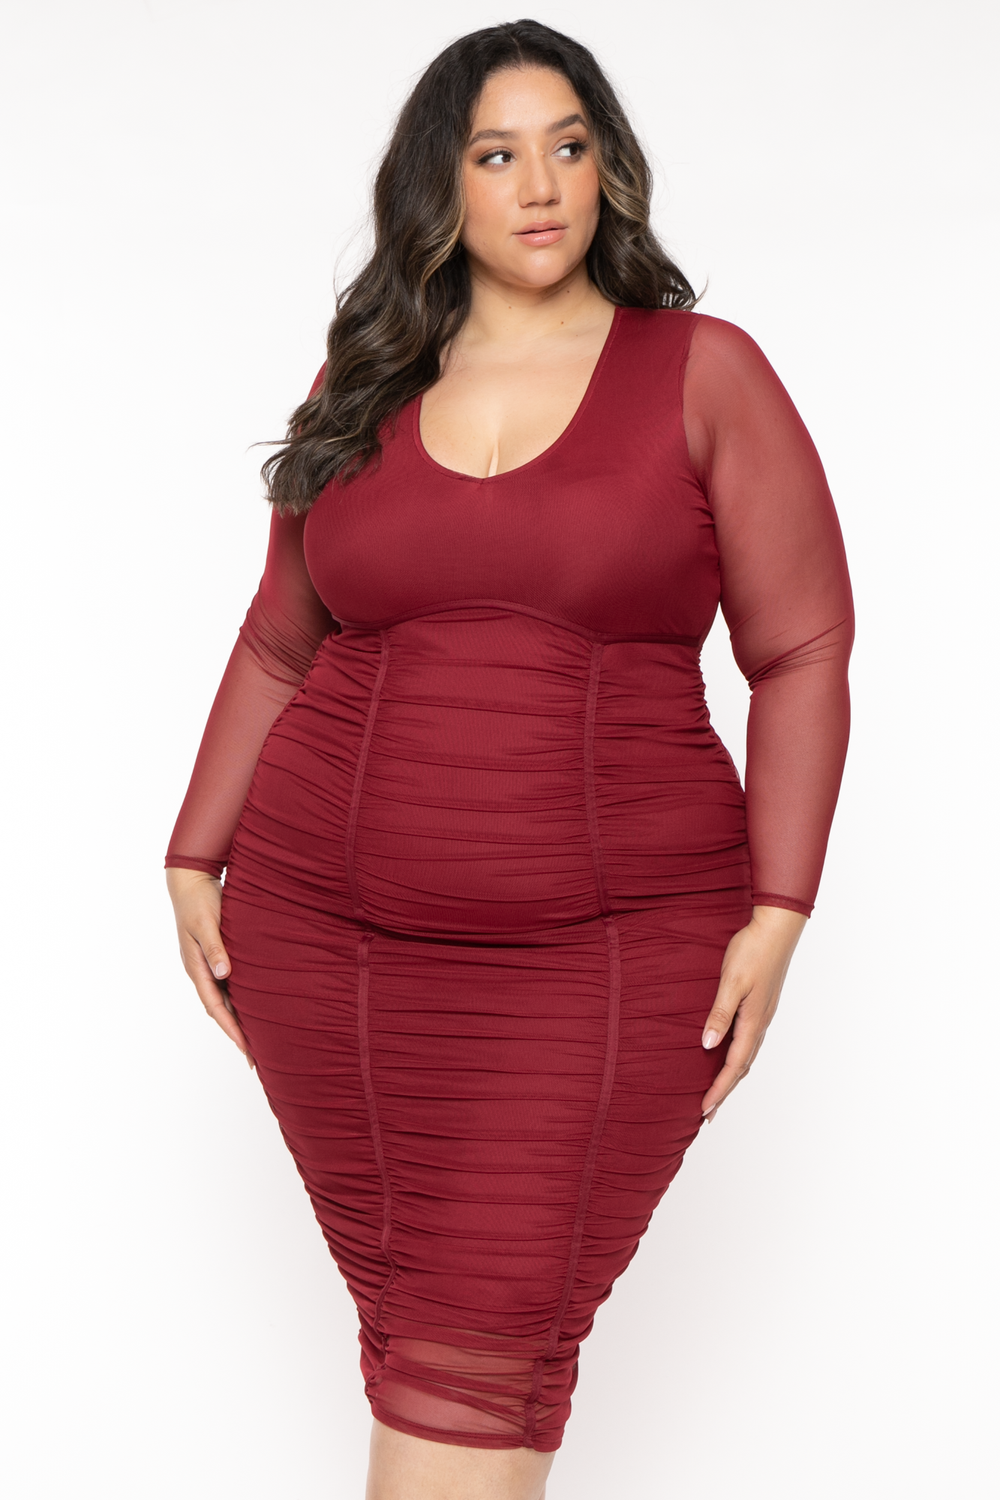 Curvy Sense - Standing Fiercely @lovetiffanyjanise . ✨✨✨✨✨ Tap to shop and  get 40% off 🛍. Use code BF40 and don't miss out on our Black Friday sale # curvysense #curvysensedoll #plussizefashion #curvygirl #